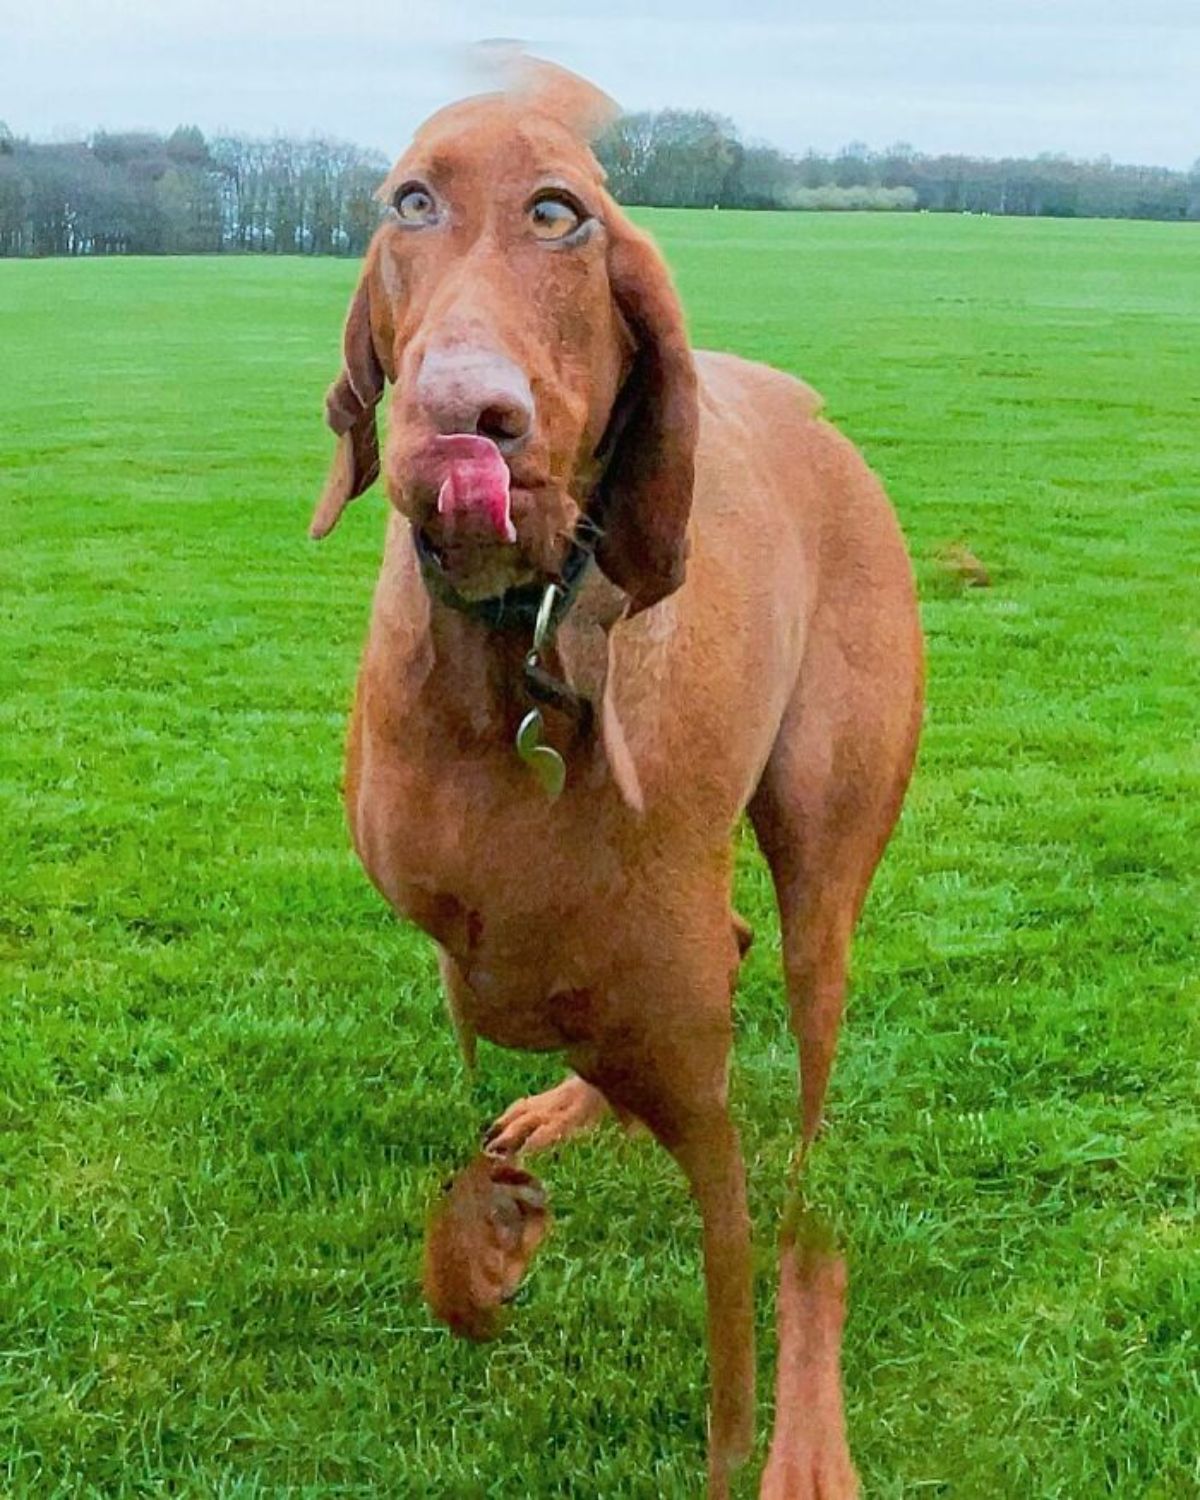 panoramic fail of brown dog standing in a field with a smushed up face, large eyes and some parts of the legs missing